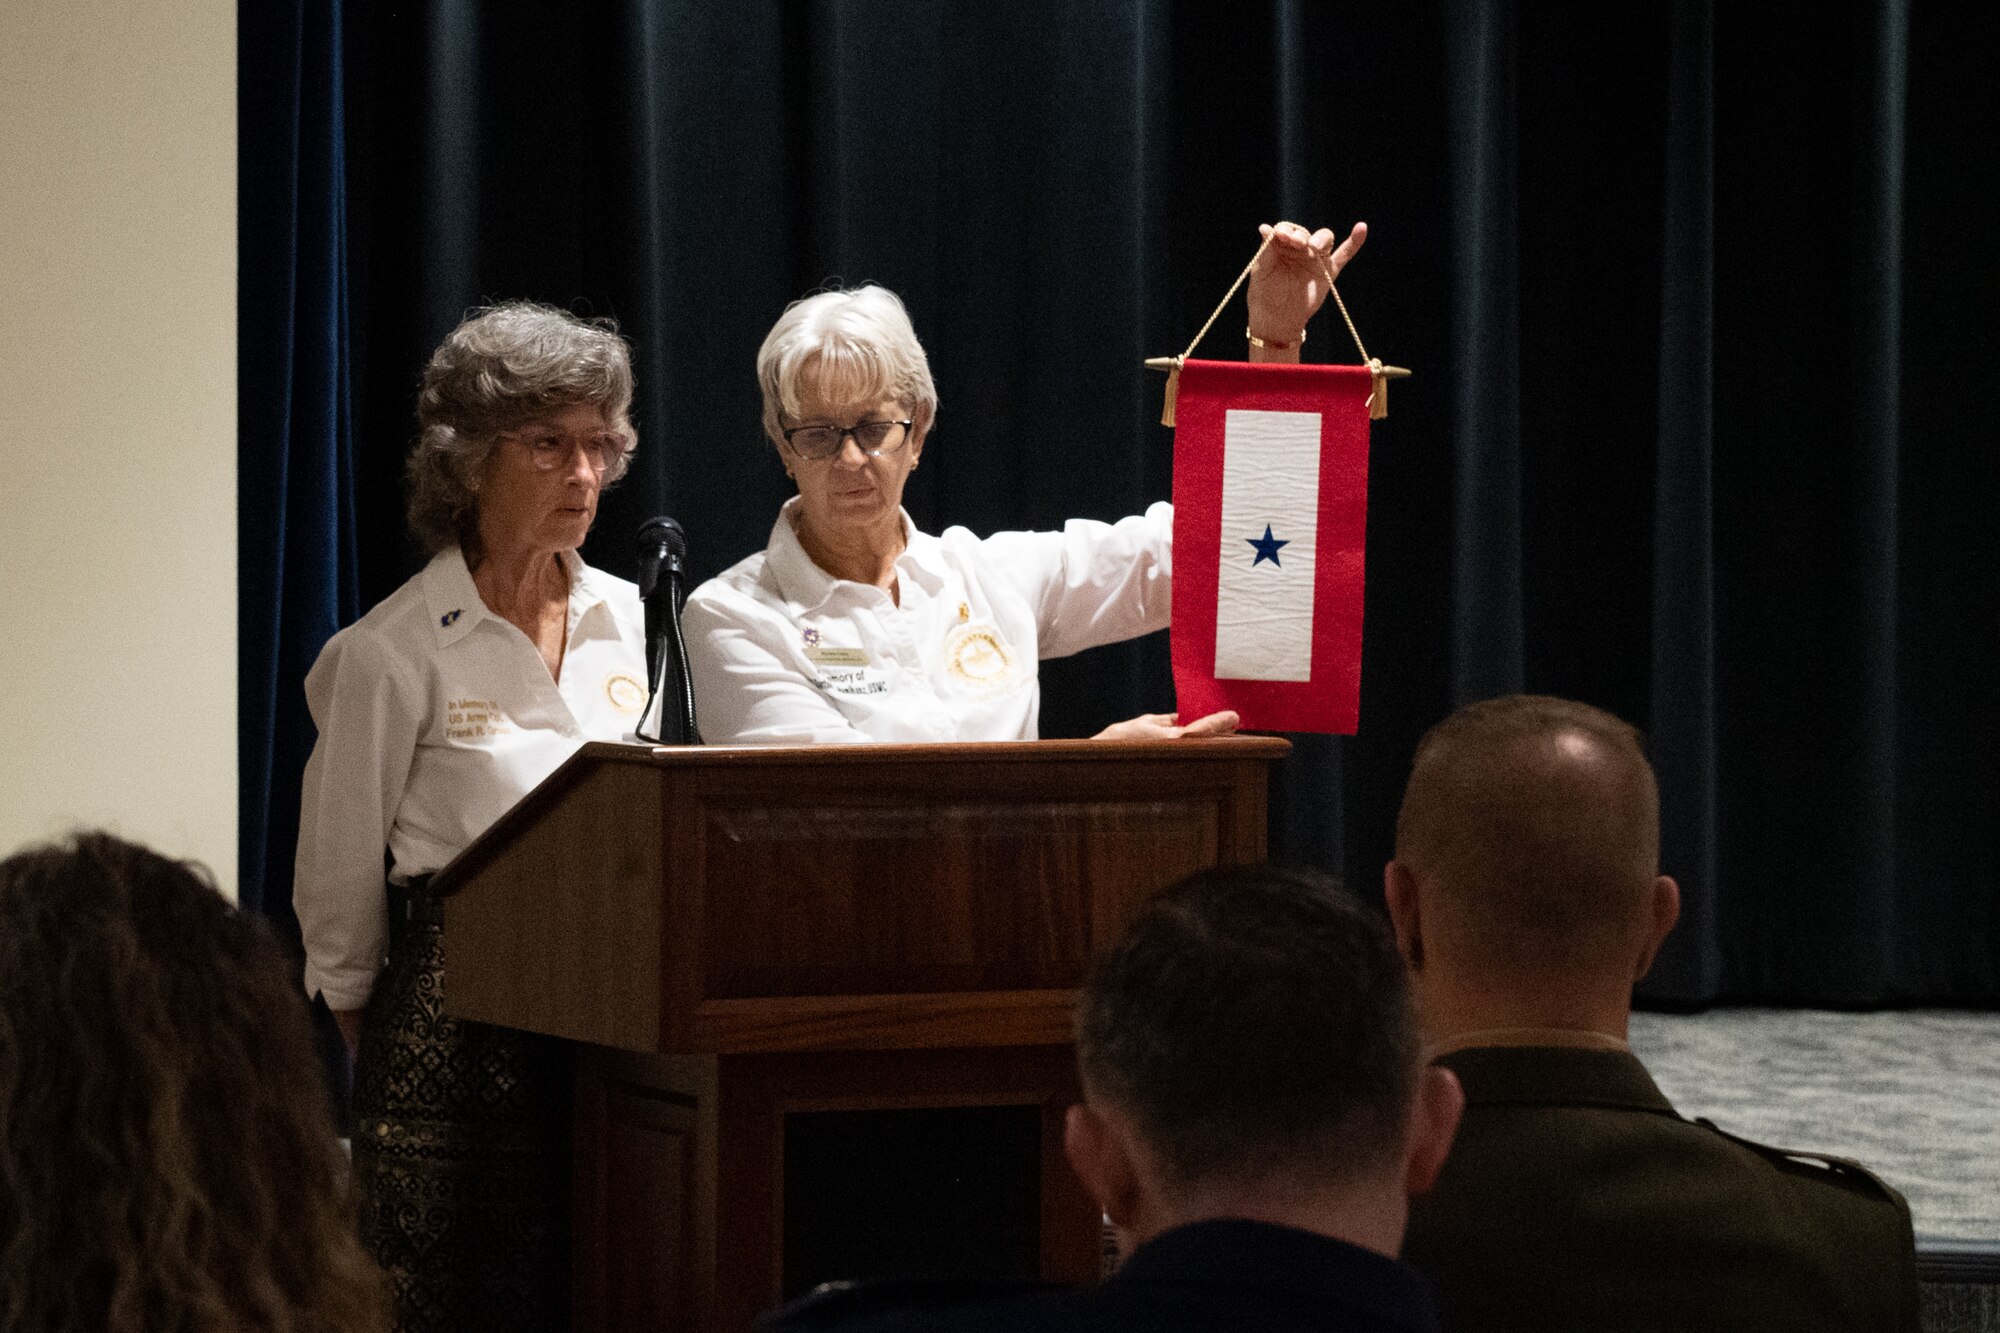 Michele Carey, Gold Star Mother of USMC Corporal Barton Humlhanz, and Toni Gross, Gold Star Mother of U.S. Army Corporal Frank R. Gross, present the symbols of service and sacrifice during the Gold Star Mothers and Families Day at MacDill Air Force Base, Florida, Sept. 24, 2023.